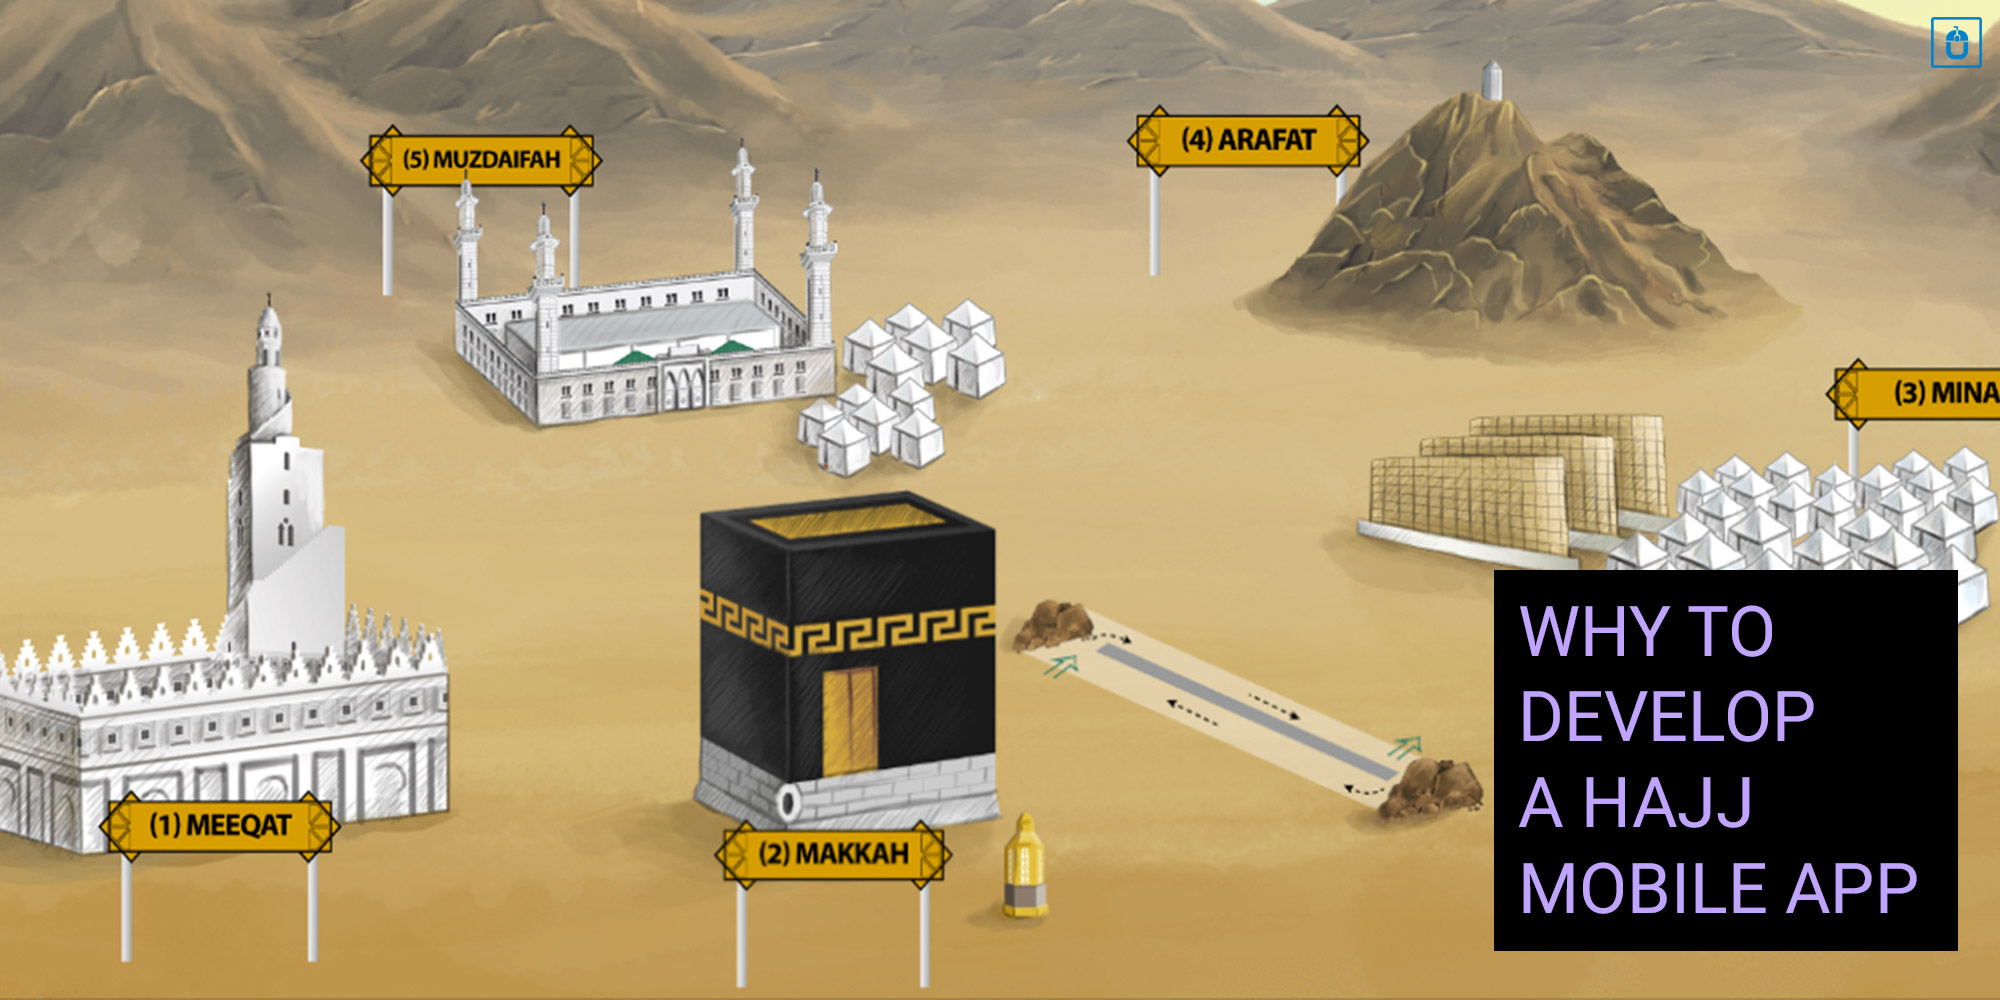 WHY TO DEVELOP A HAJJ MOBILE APP